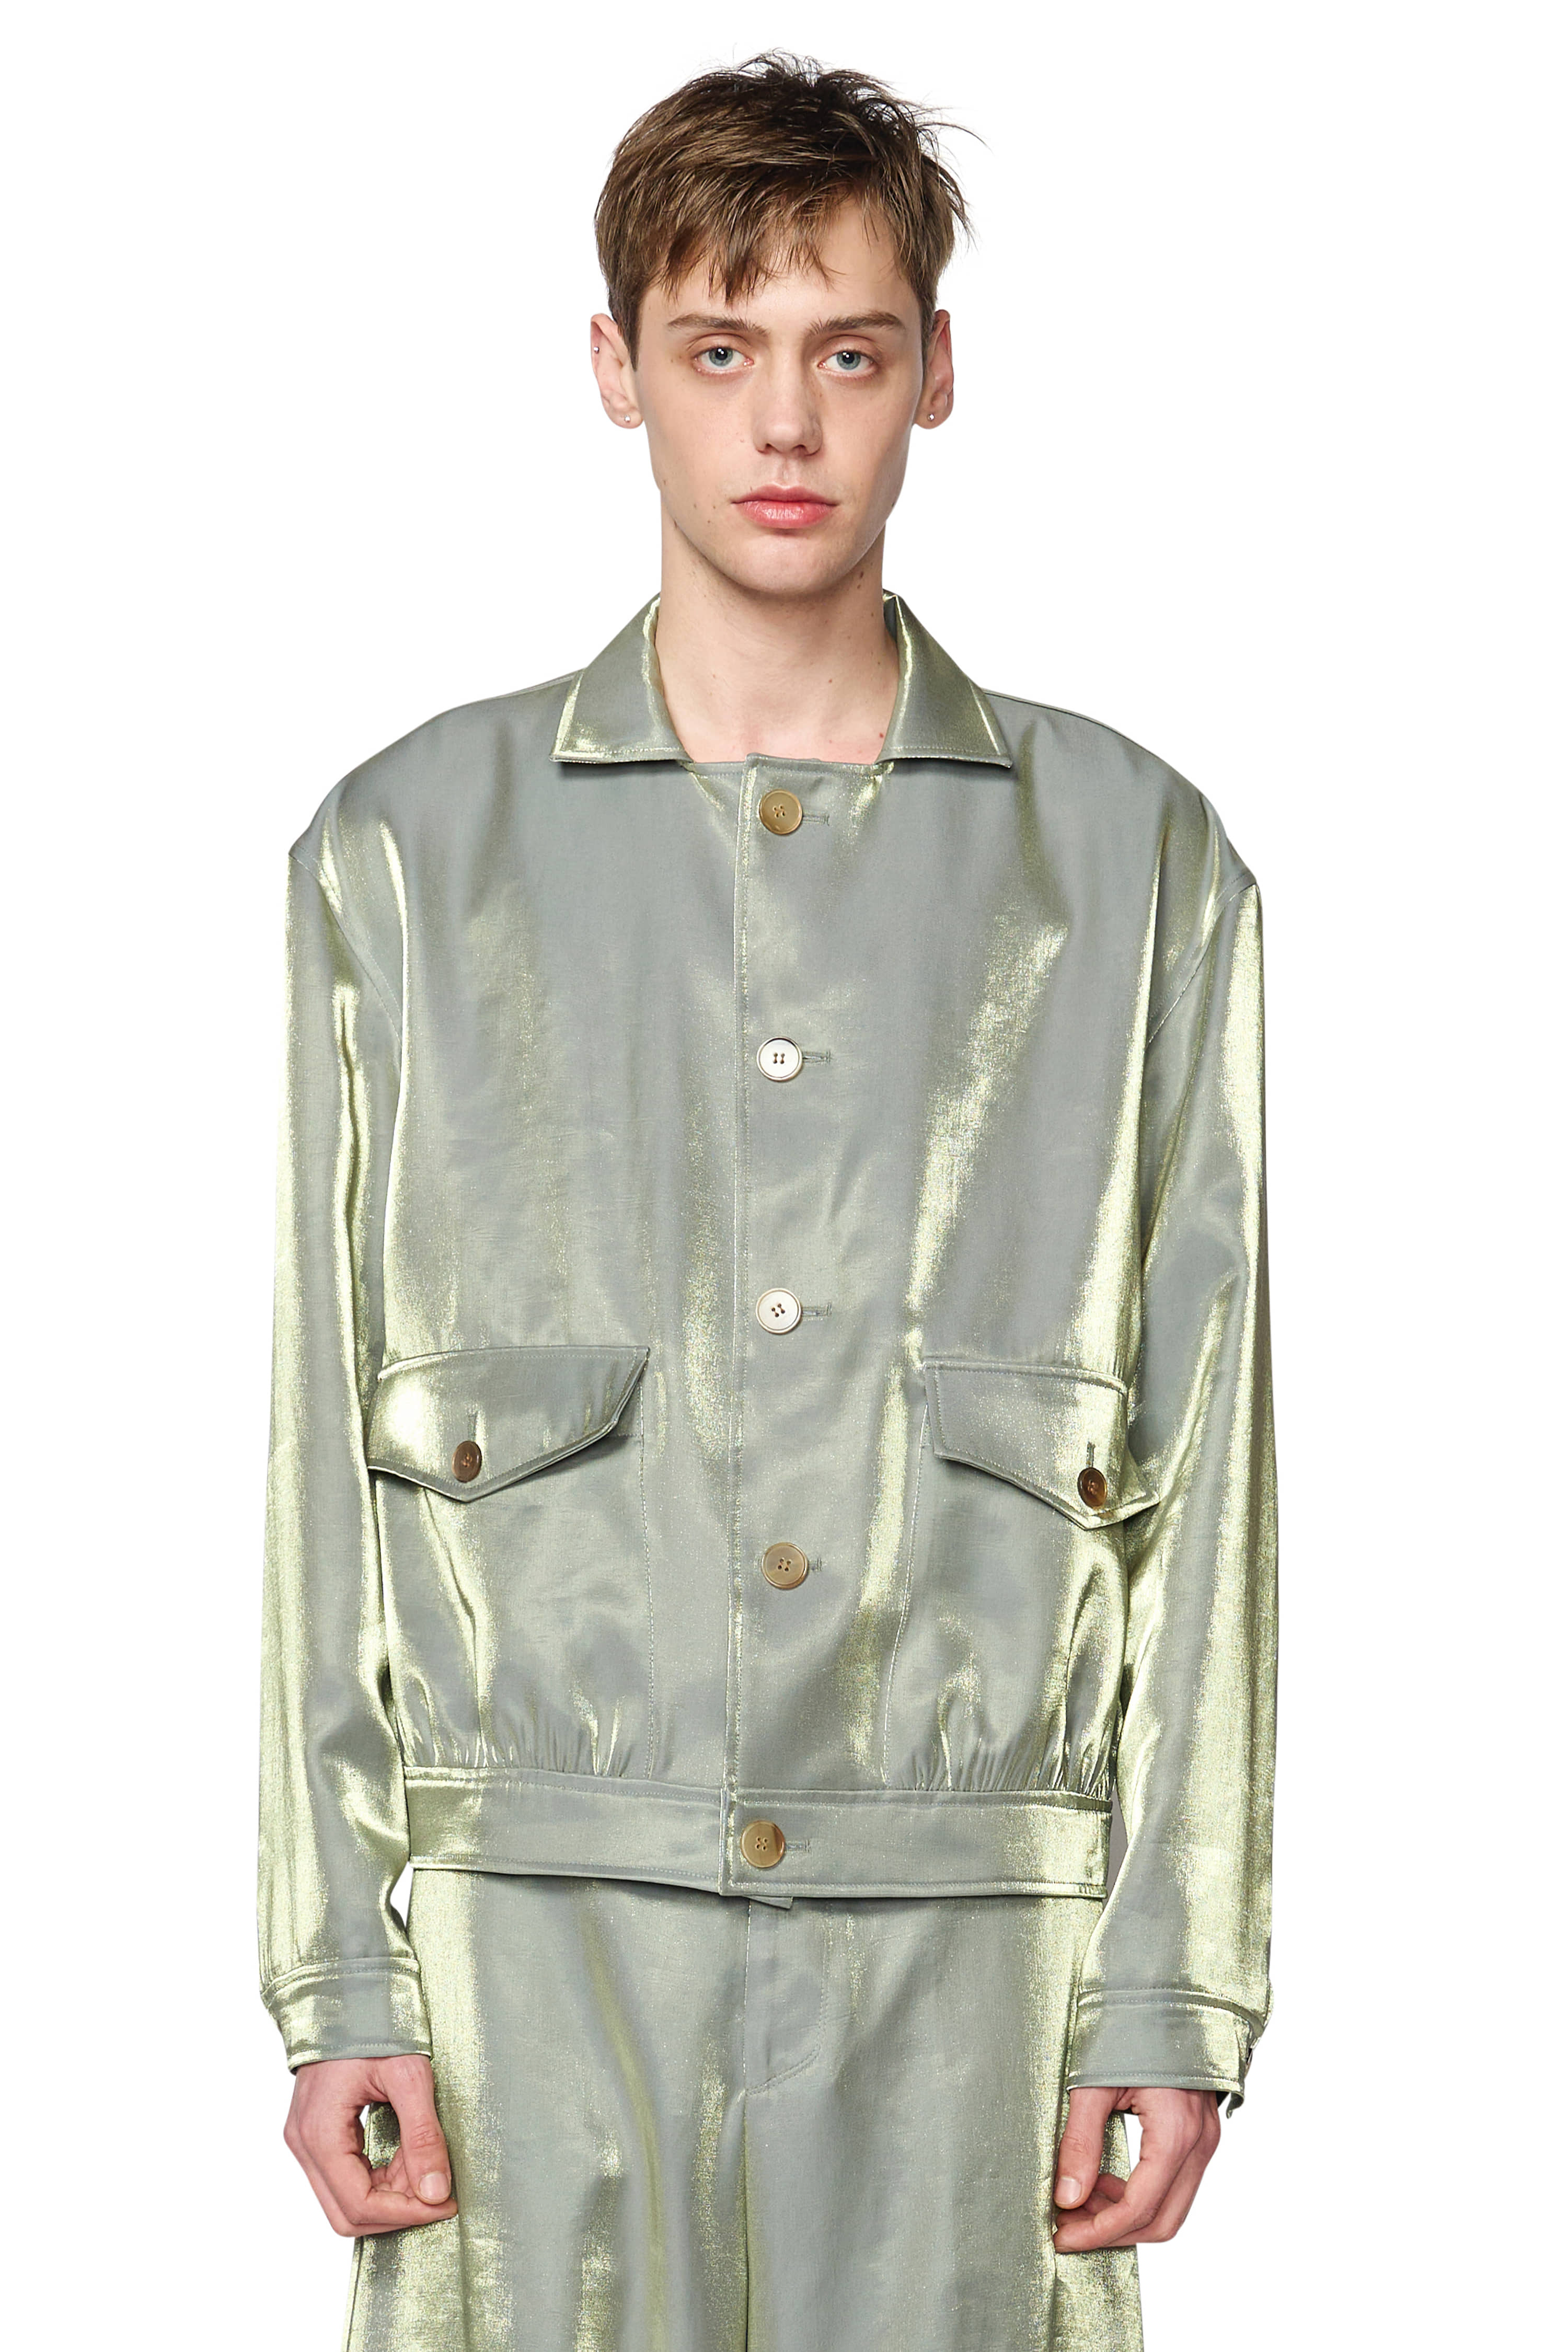 [ Delivery from 5/1 ] GLOSSY GREEN POCKET BLOUSON JACKET